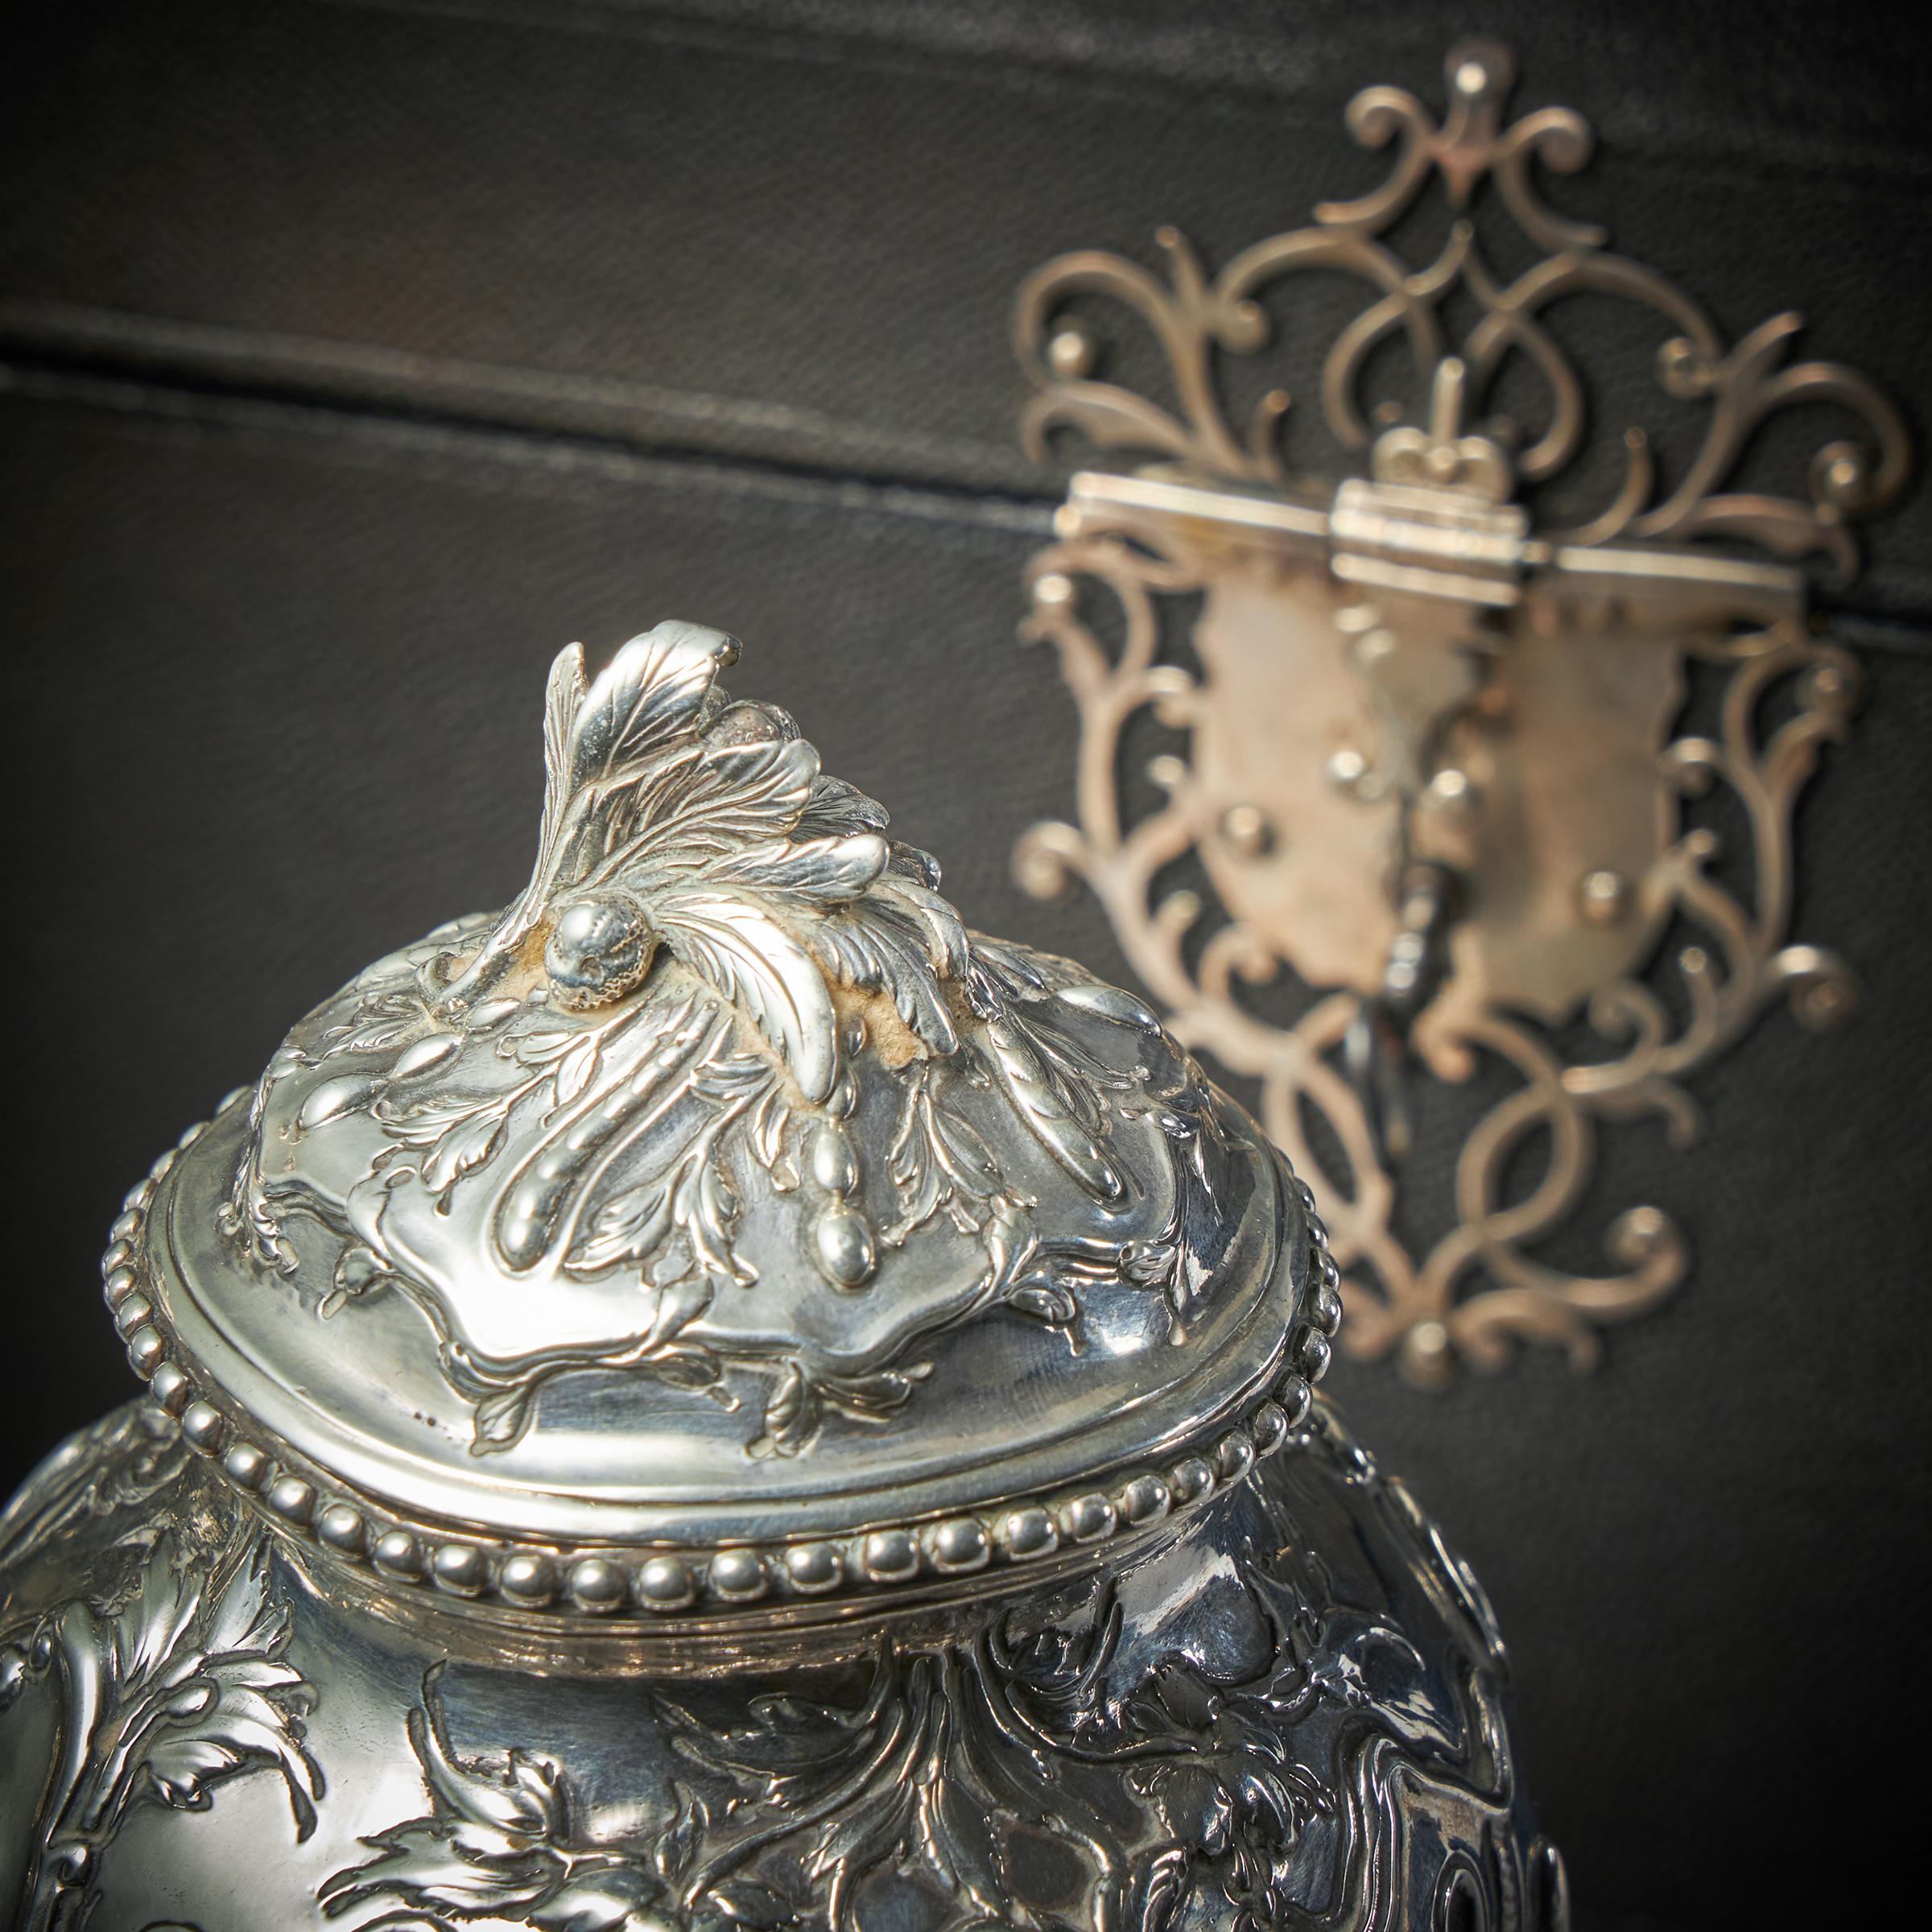 Rare Silver Mounted George II Shagreen Tea Caddy with Silver Rocco Canistors For Sale 8